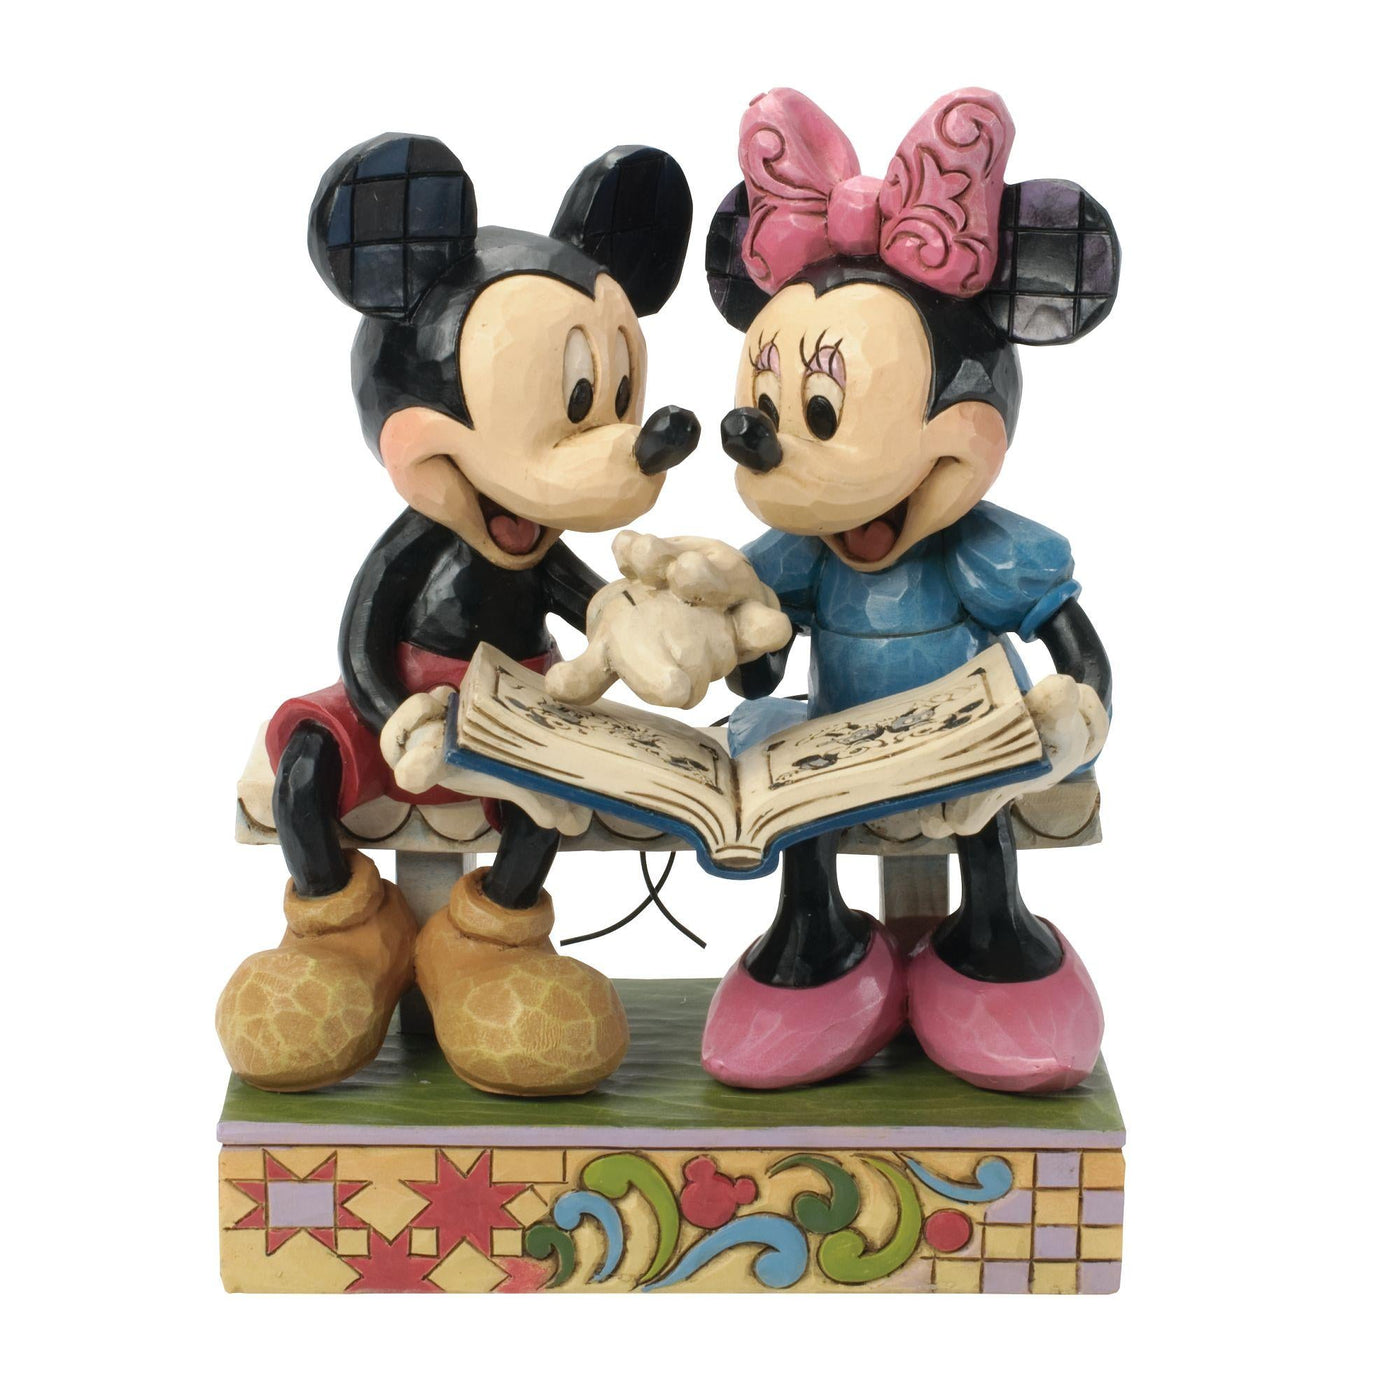 Disney Traditions - Mickey & Minnie Looking Photos - Official Licensed Figure